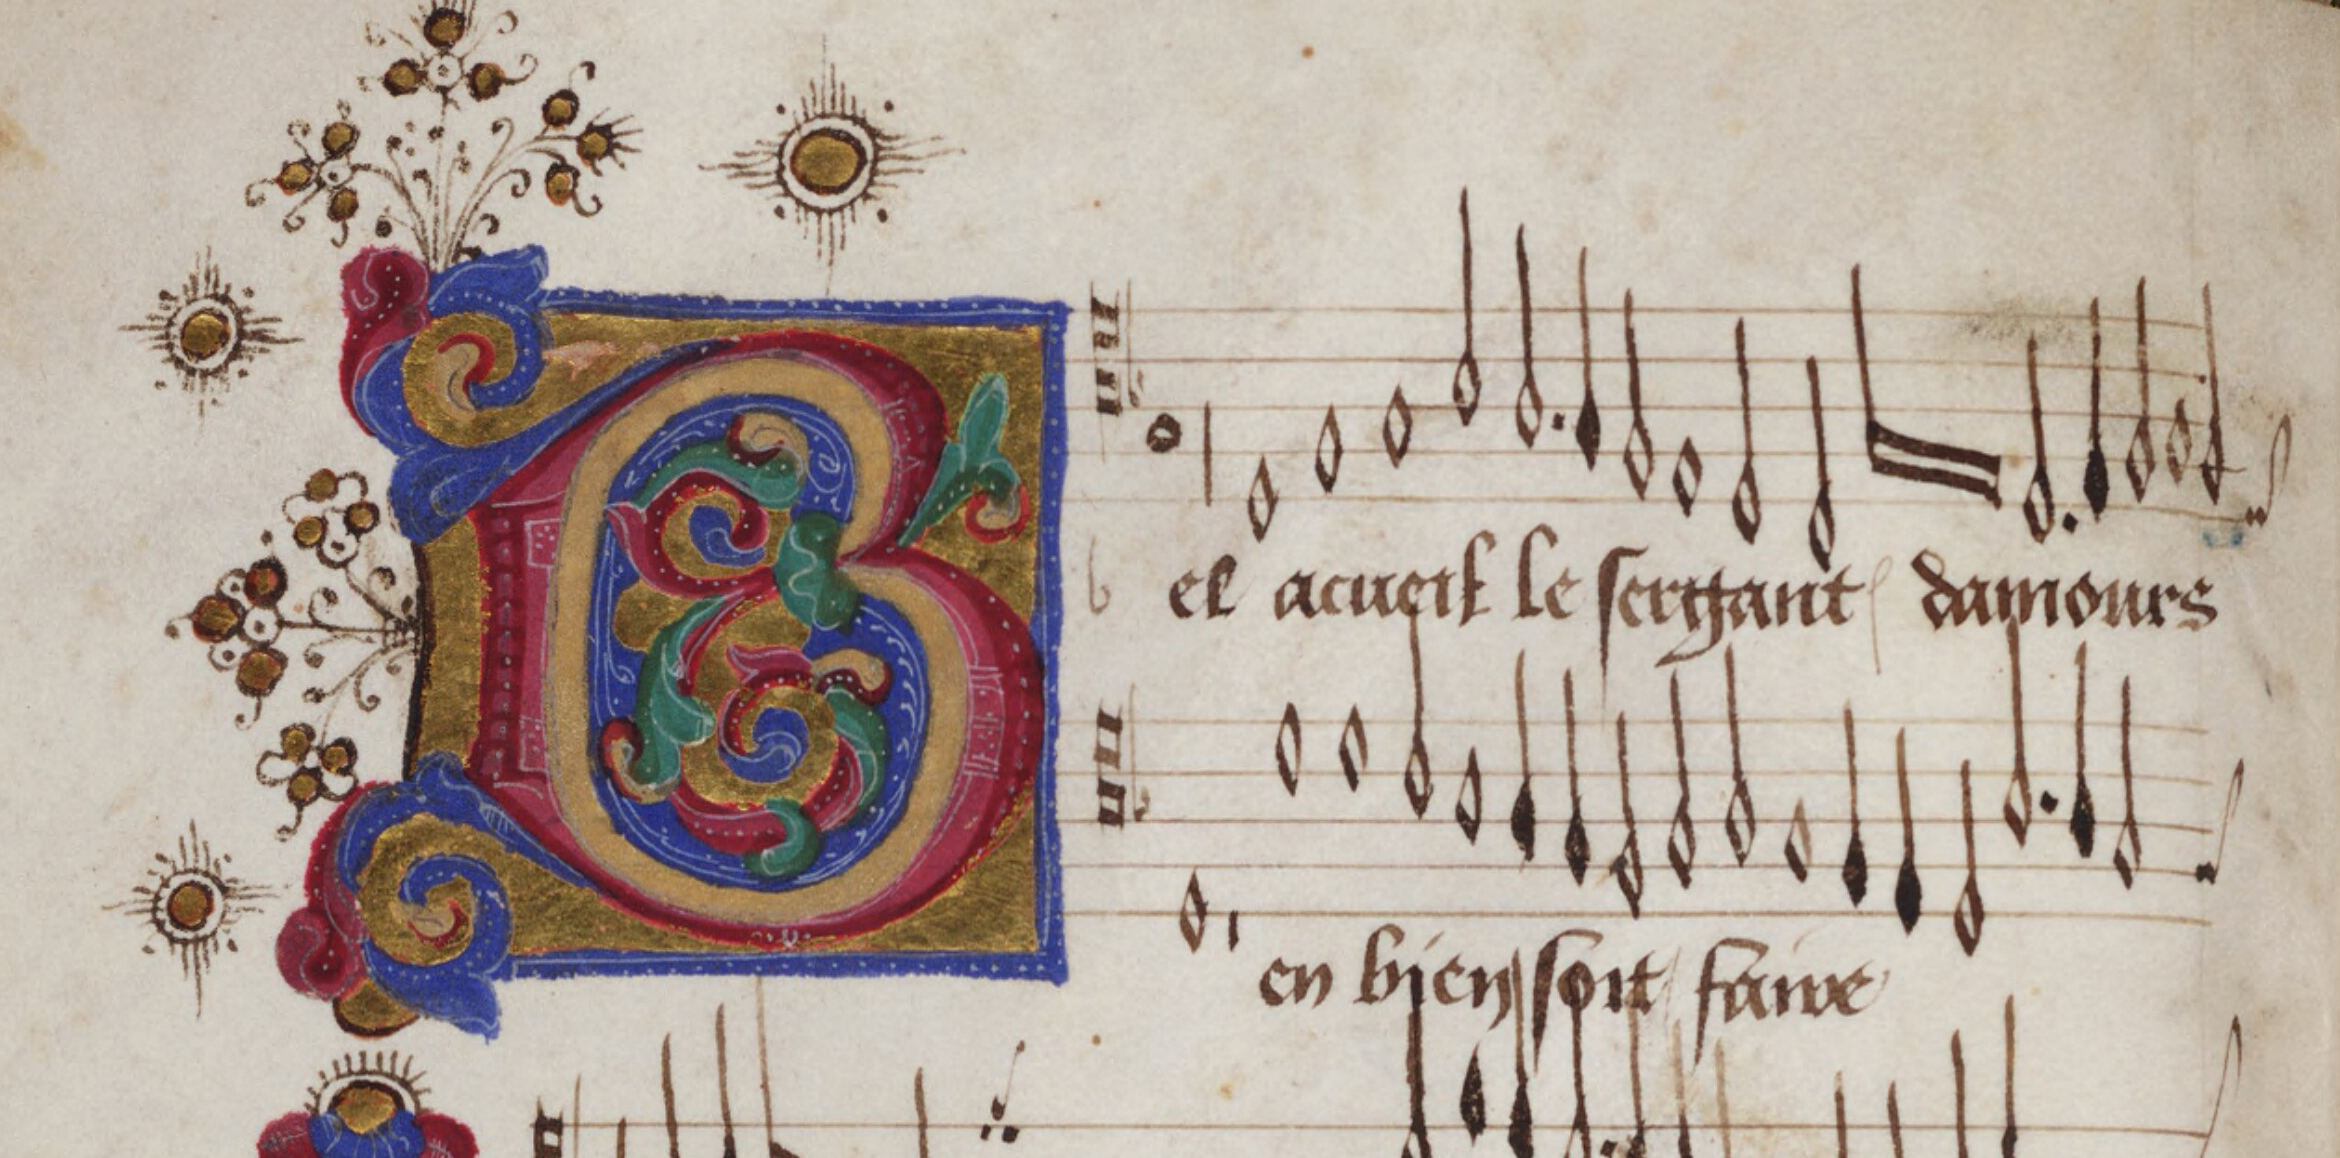  Antoine Busnoys, Bel Acueil (beginning of Discantus). Mellon Chansonnier (New Haven, Yale University, Beinecke Rare Book and Manuscript Library, MS 91), fol. 1v (detail).